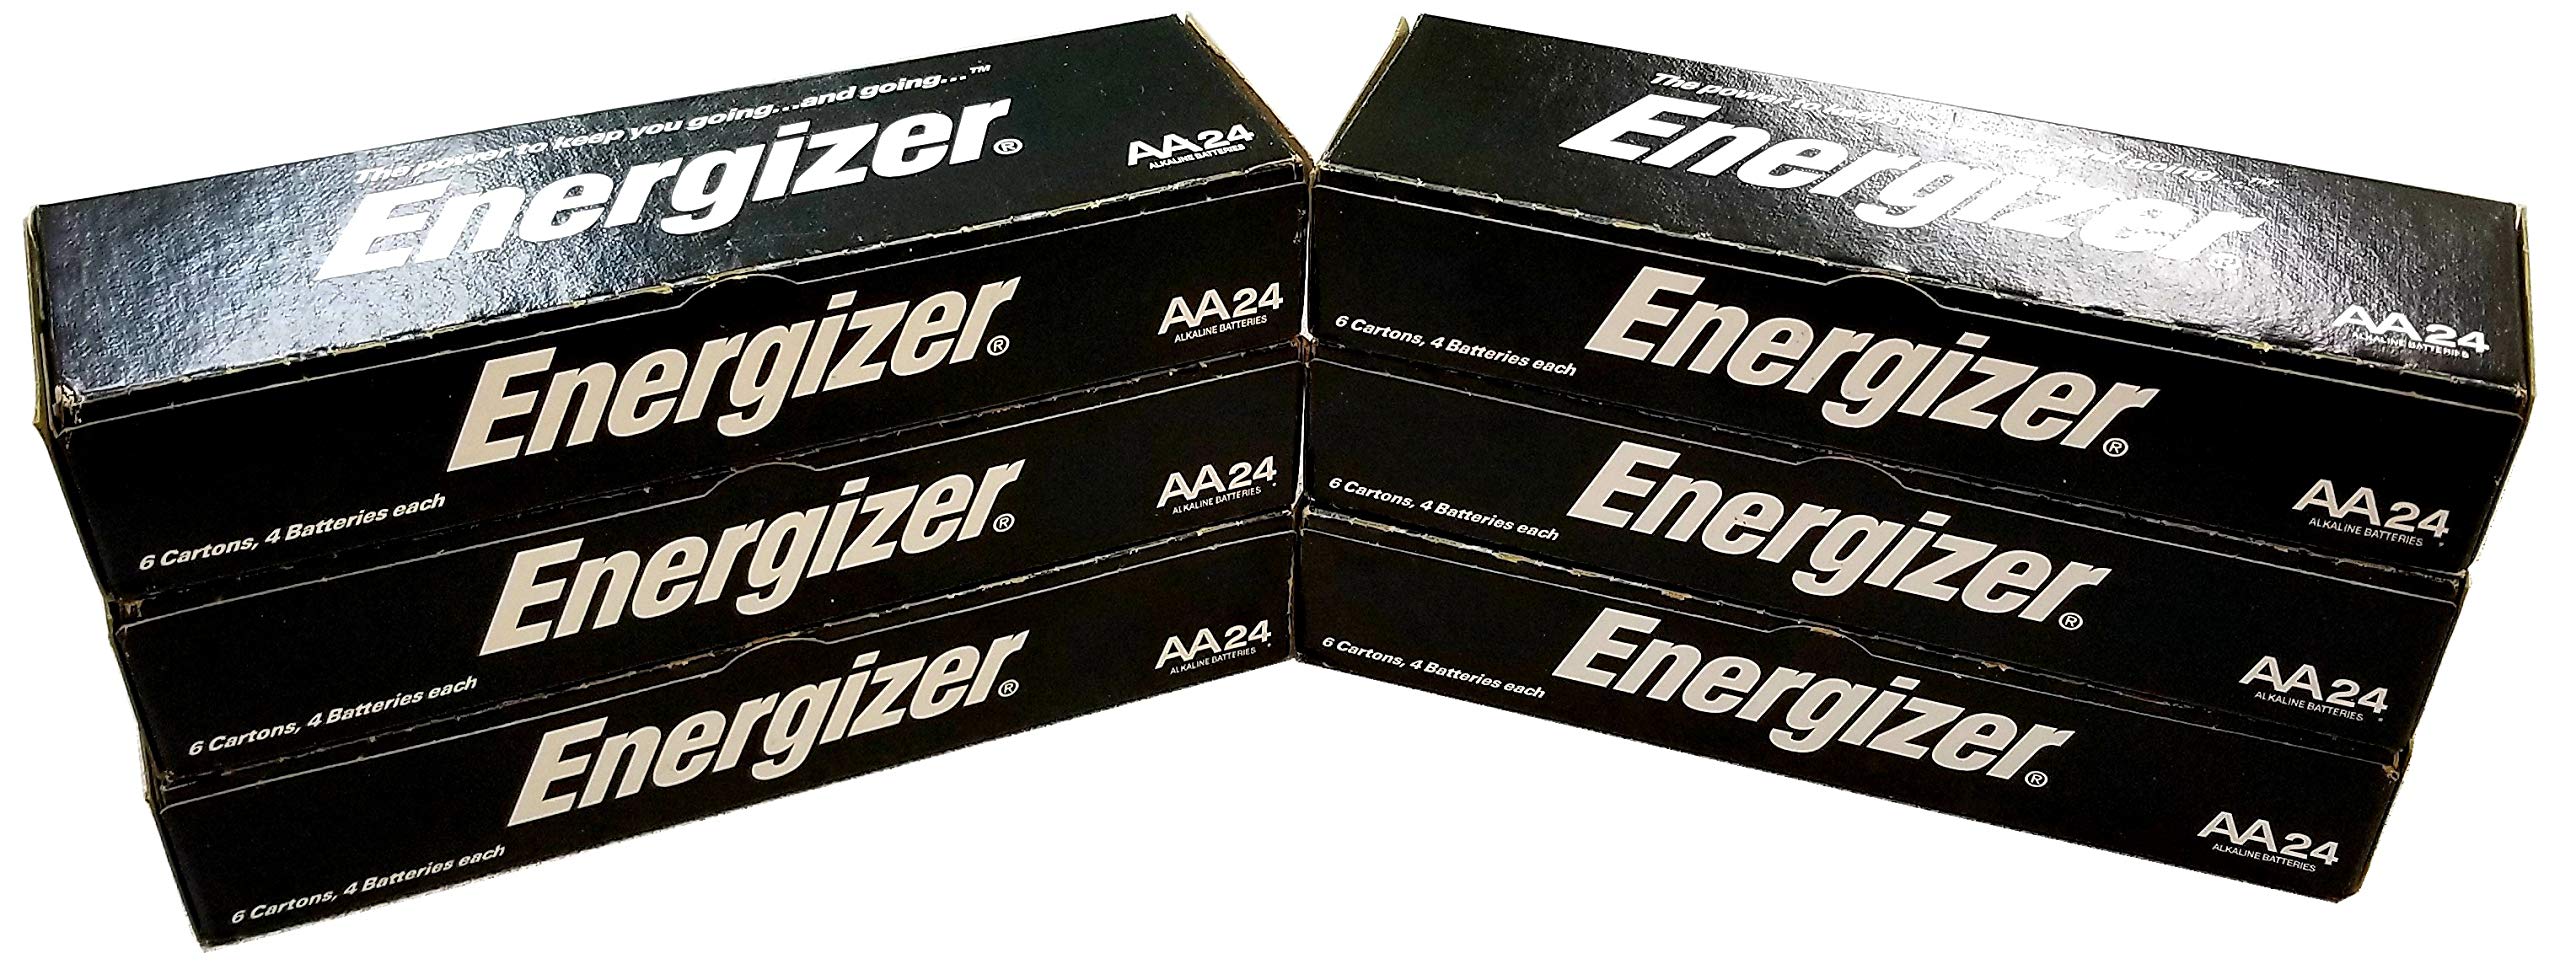 Energizer AA Max Alkaline E91 Batteries Made in USA - Expiration 12/2024 or Later - 144 Count (144)